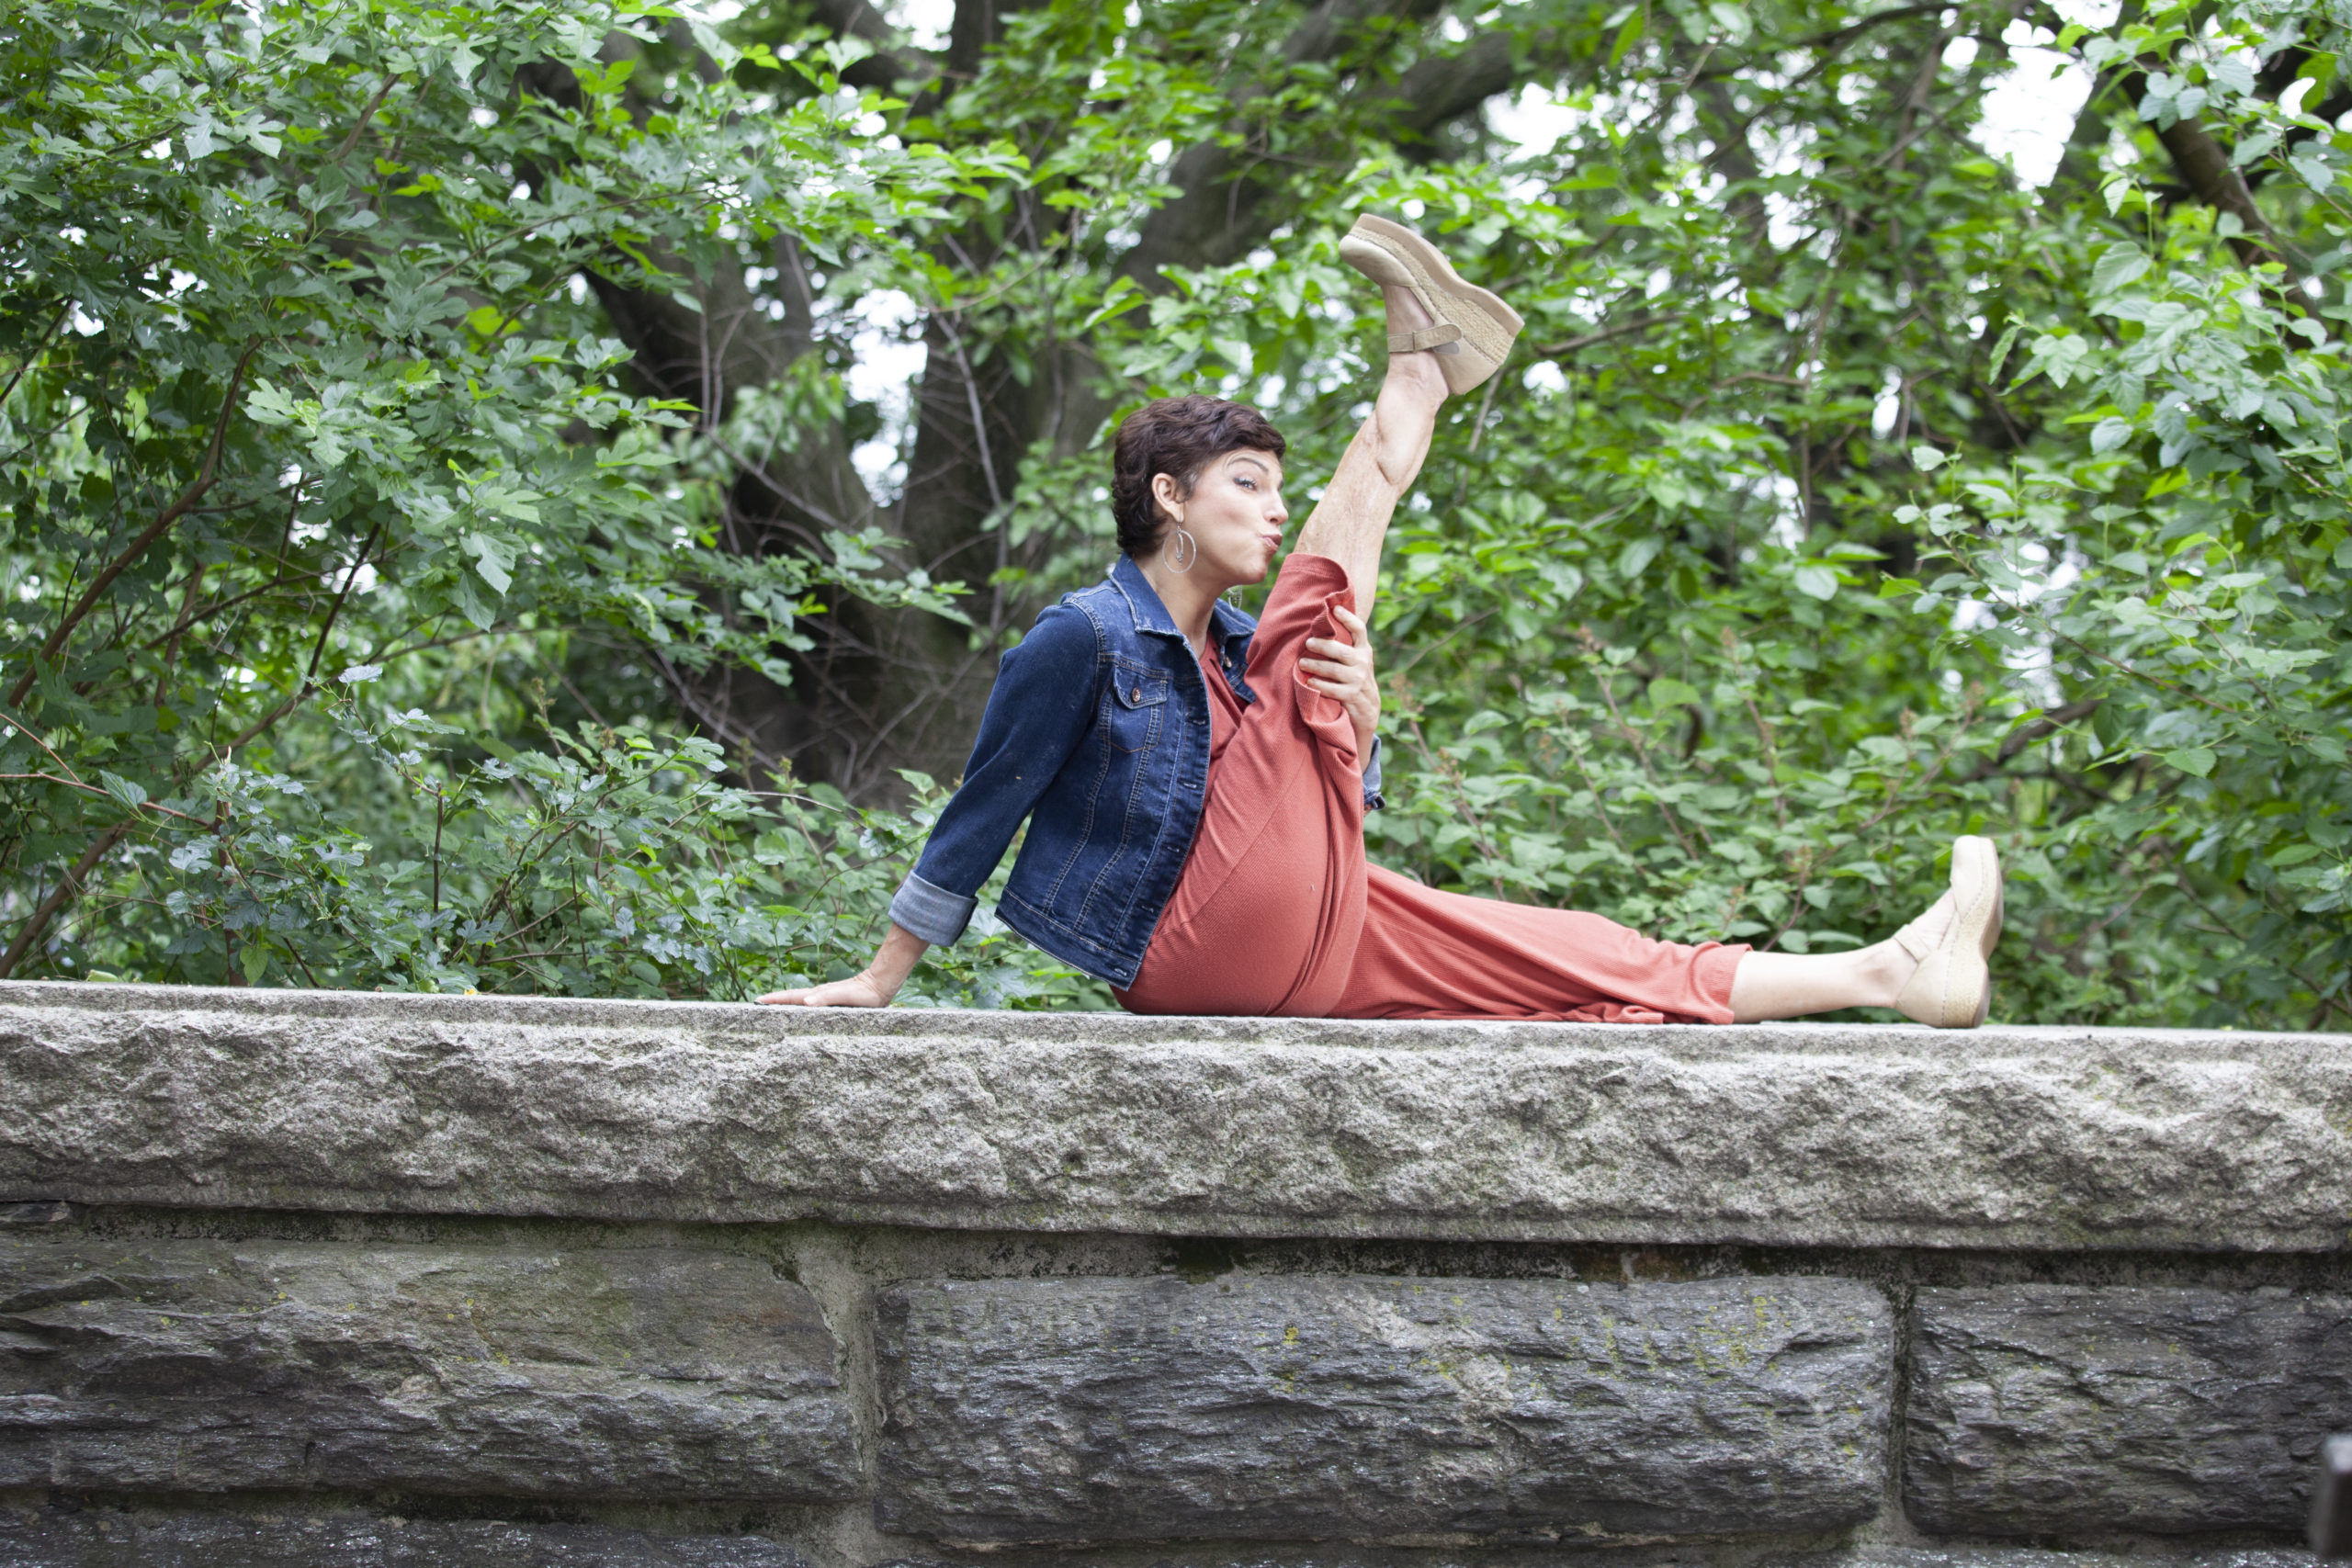 Amy Jordan sits atop a stone wall, her right leg extended upwards as she leans in to kiss her knee.